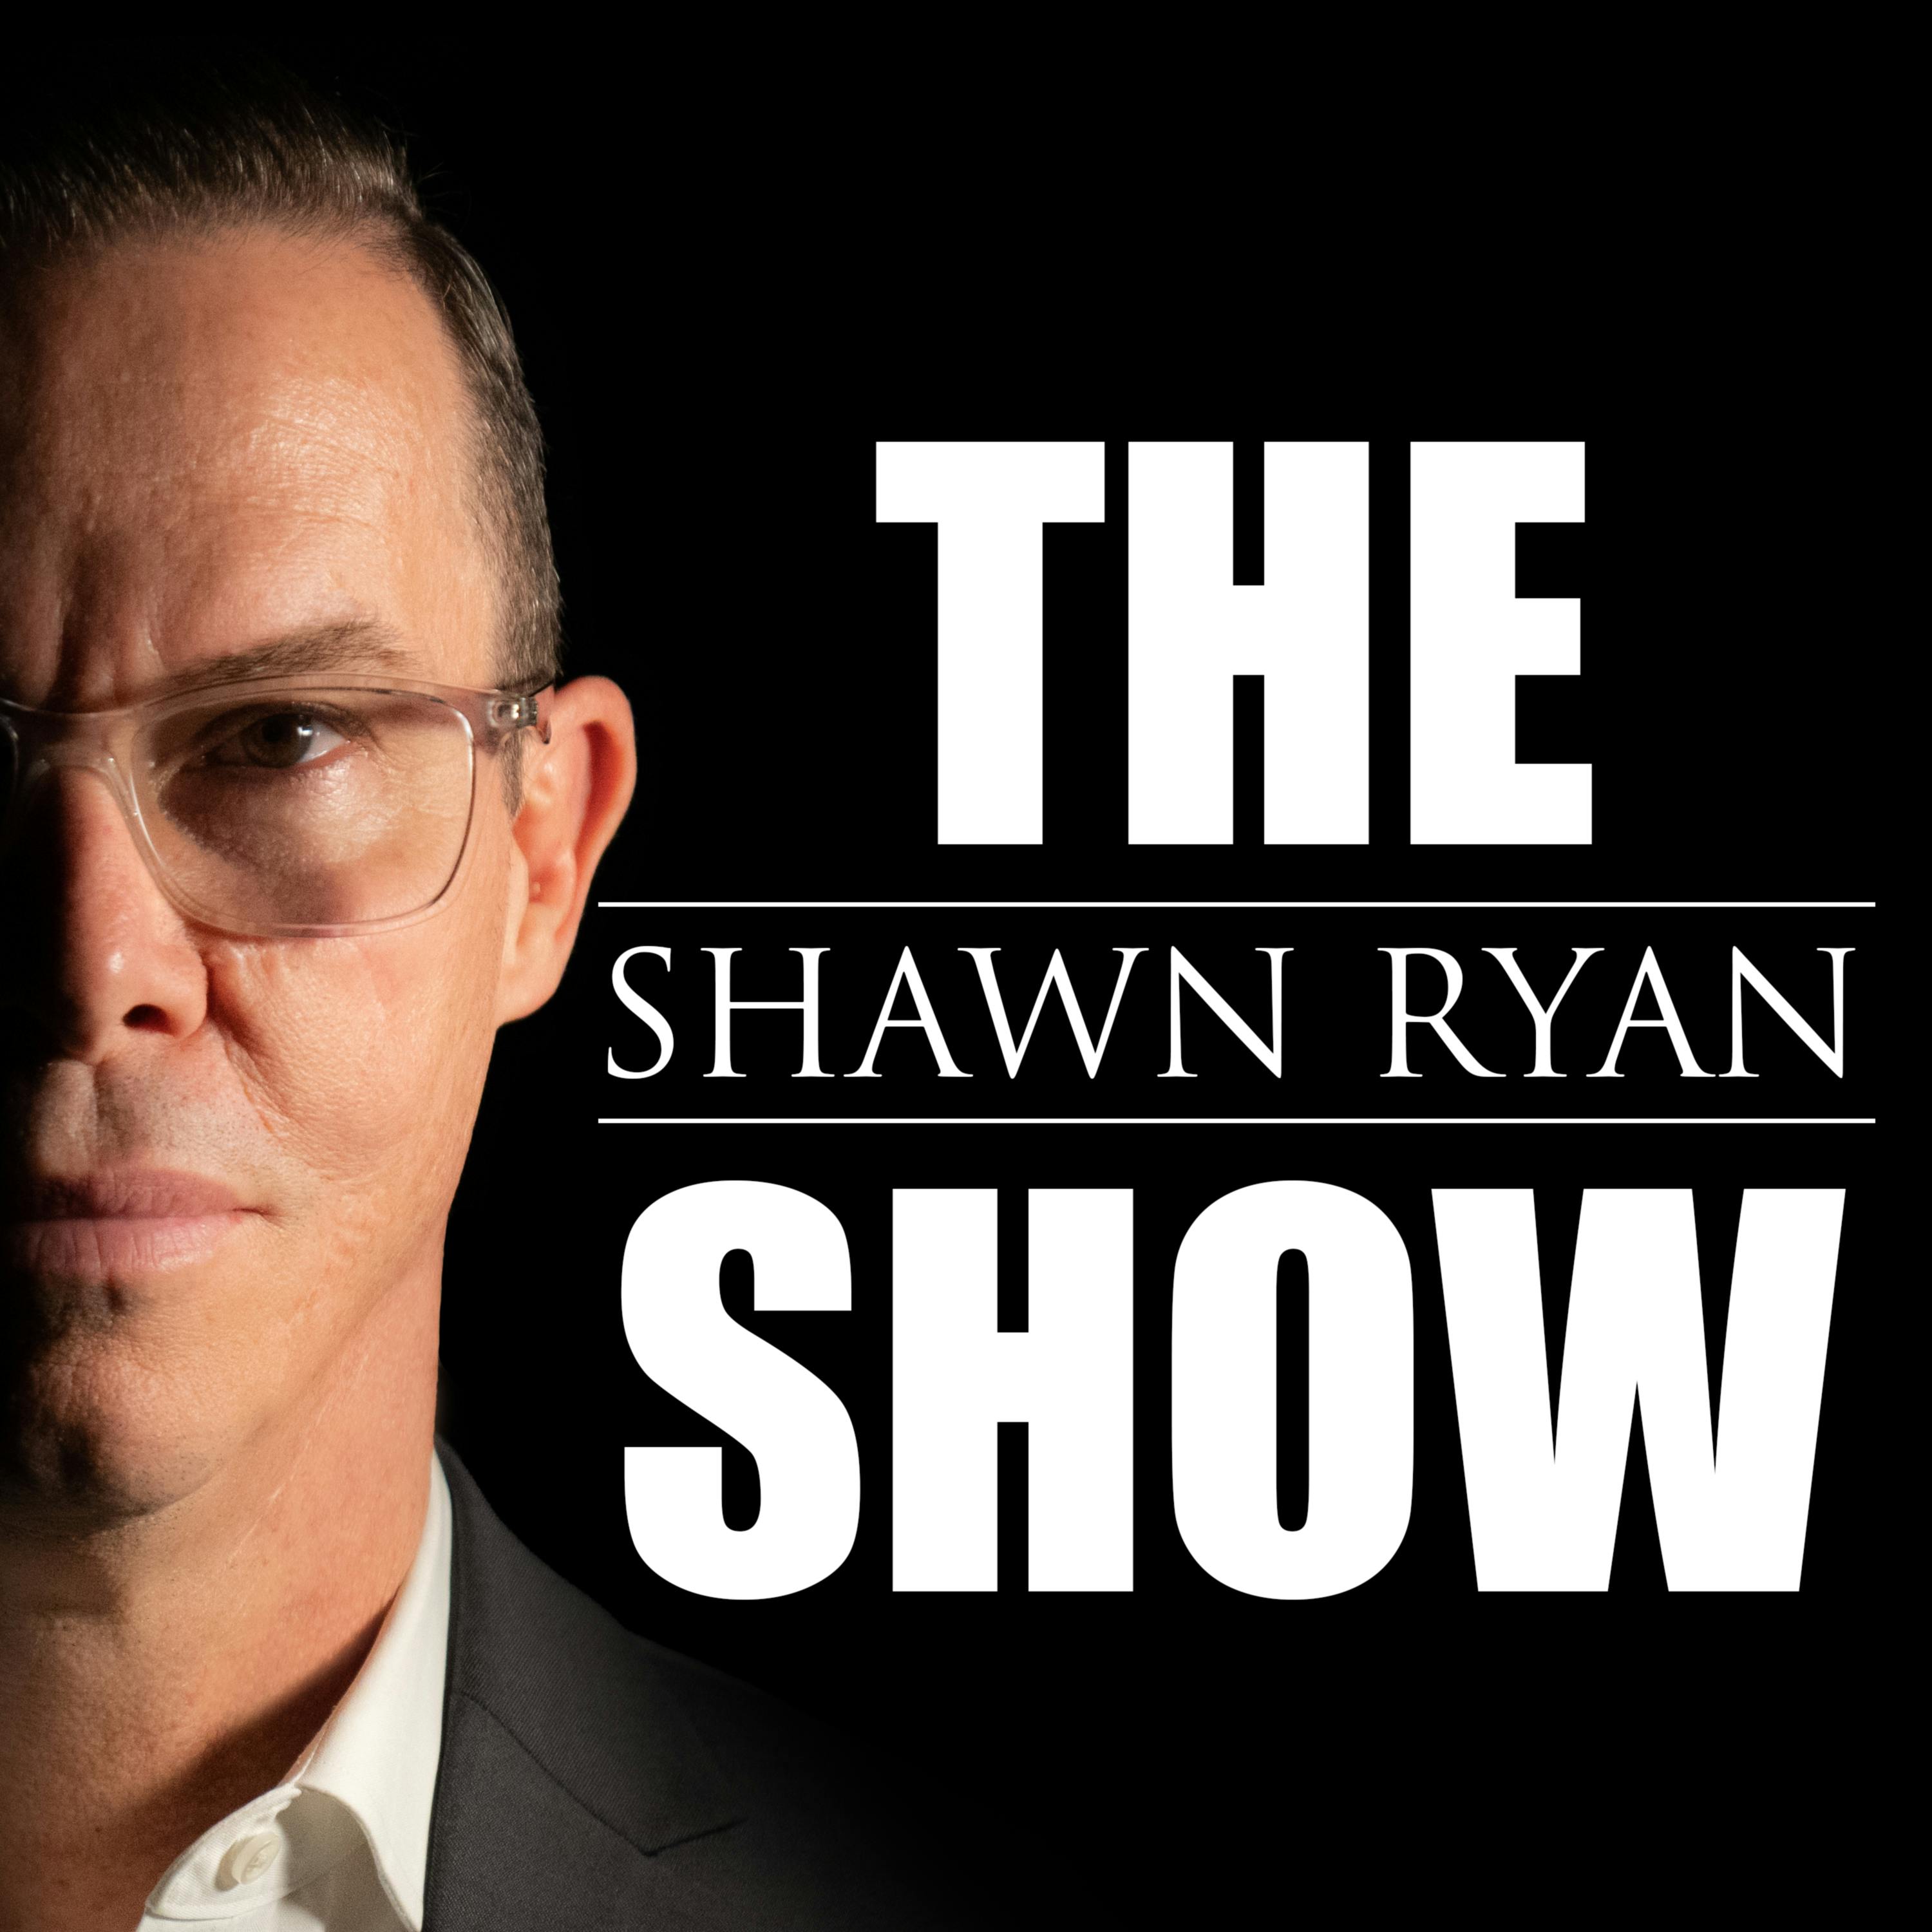 #59 Dr. Michael Bagnell - Neurologist Unlocks Human Brain and Reveals Tips to Improve Mental Health by Shawn Ryan | Cumulus Podcast Network